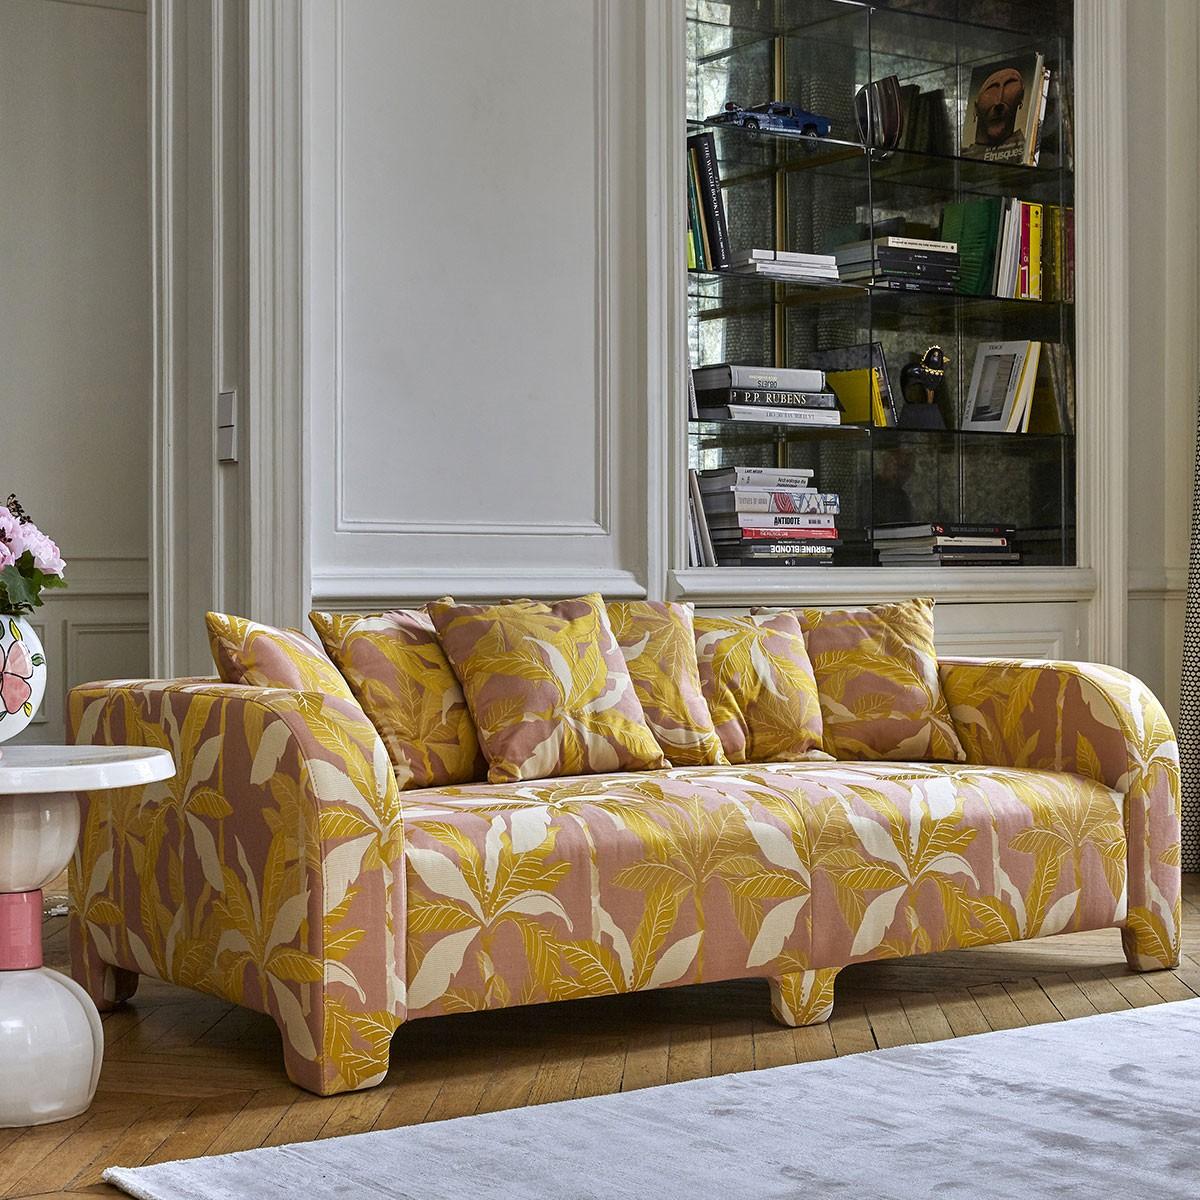 Popus Editions Graziella 4 seater sofa in sangria london linen fabric

A foot that hides another. A cushion that hides another. A curve that hides another with contemporary lines and a base like a punctuation mark, this sofa gives pride of place